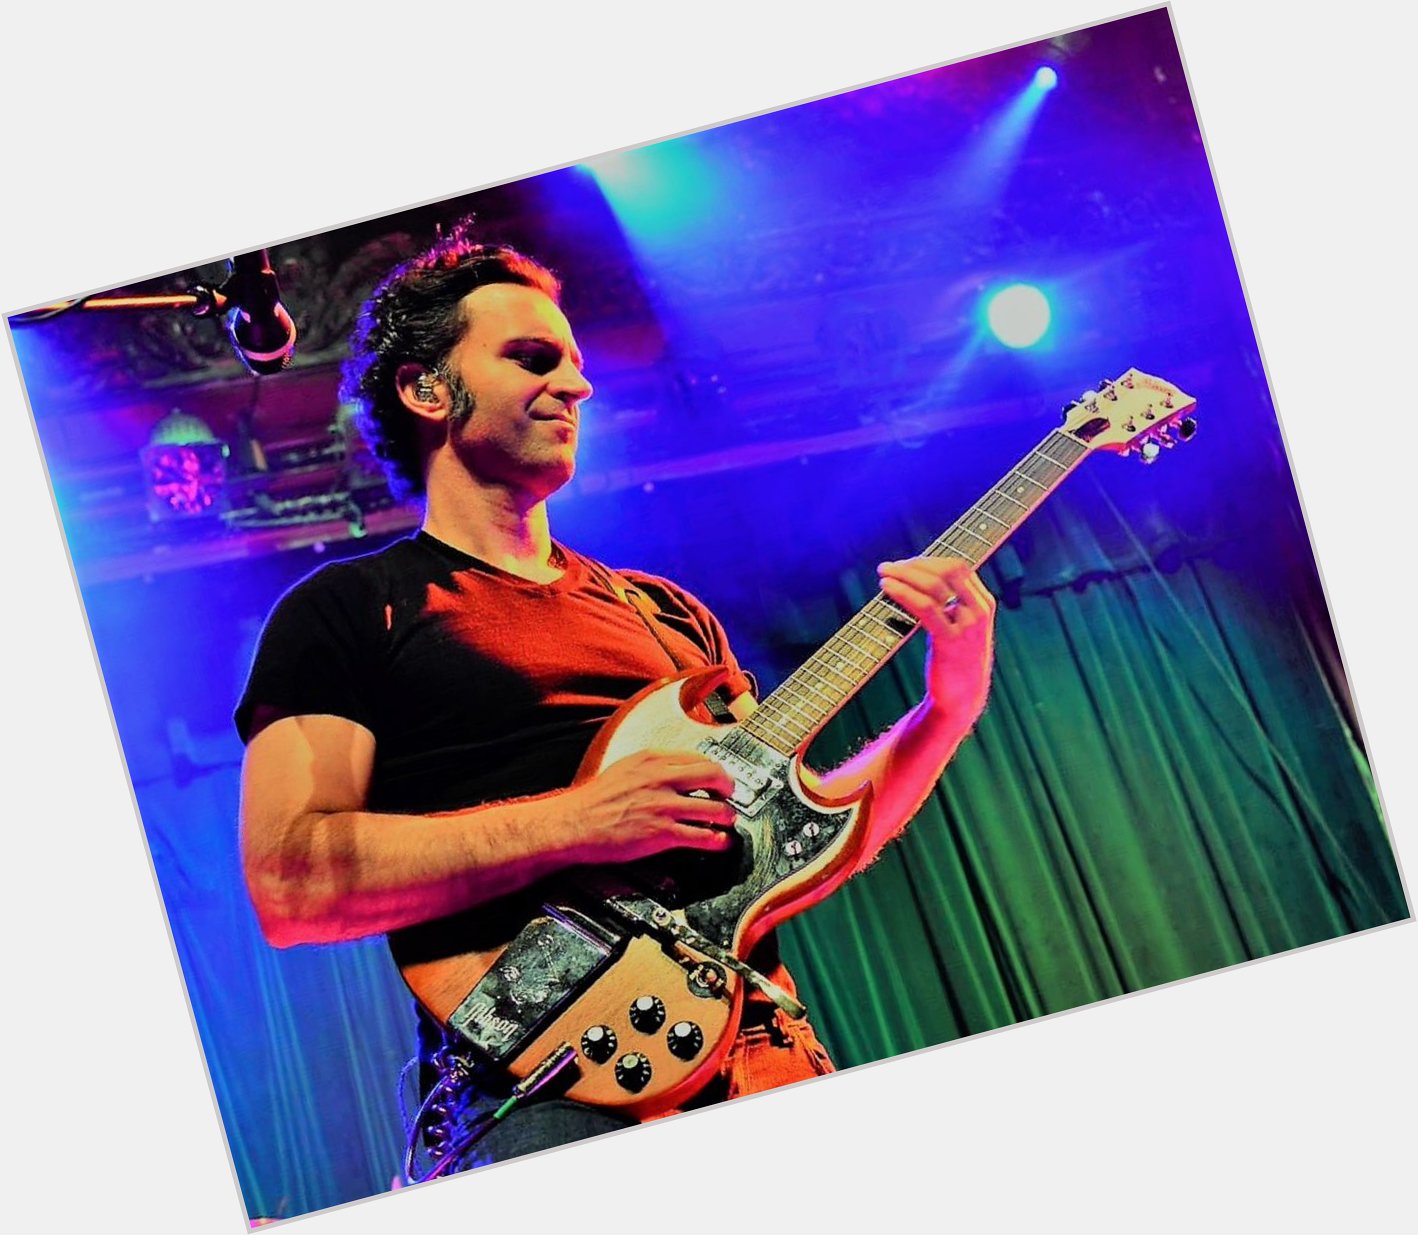 Happy Birthday on September 5th to songwriter and guitarist Dweezil Zappa 